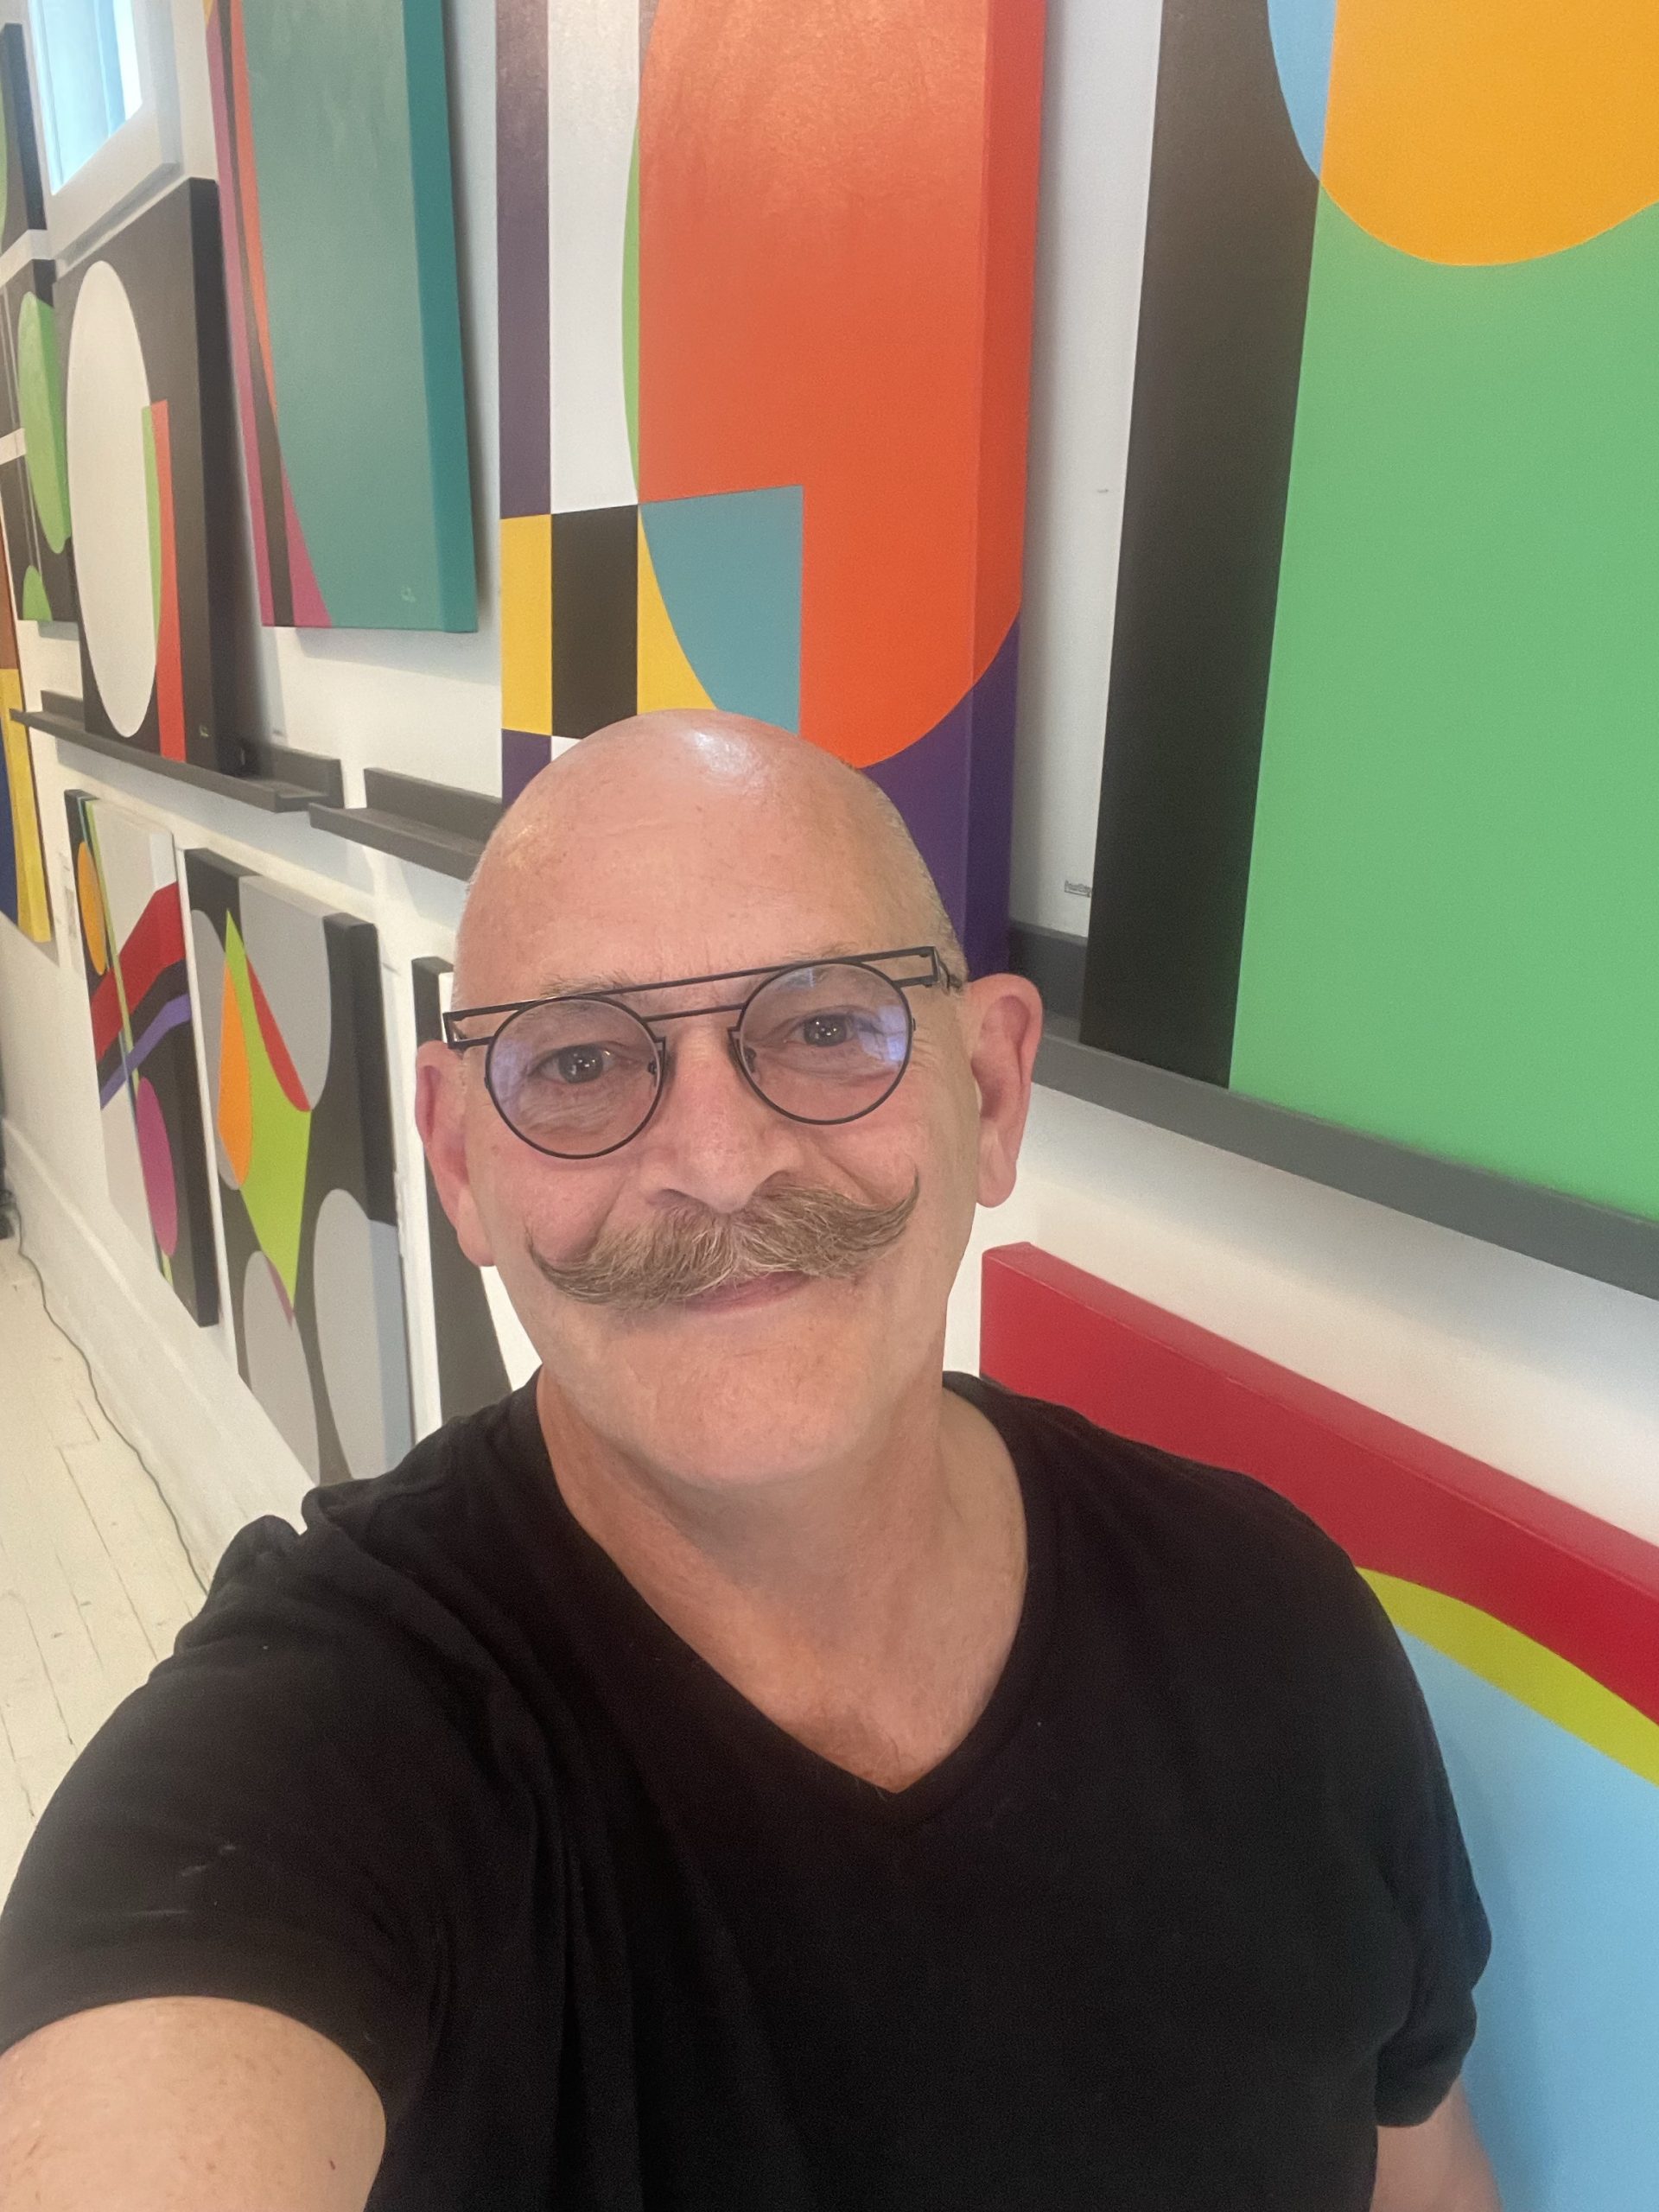 A head shot of a bald white man with a mustache and glasses, wearing a black tshirt against a background of brightly coloured art